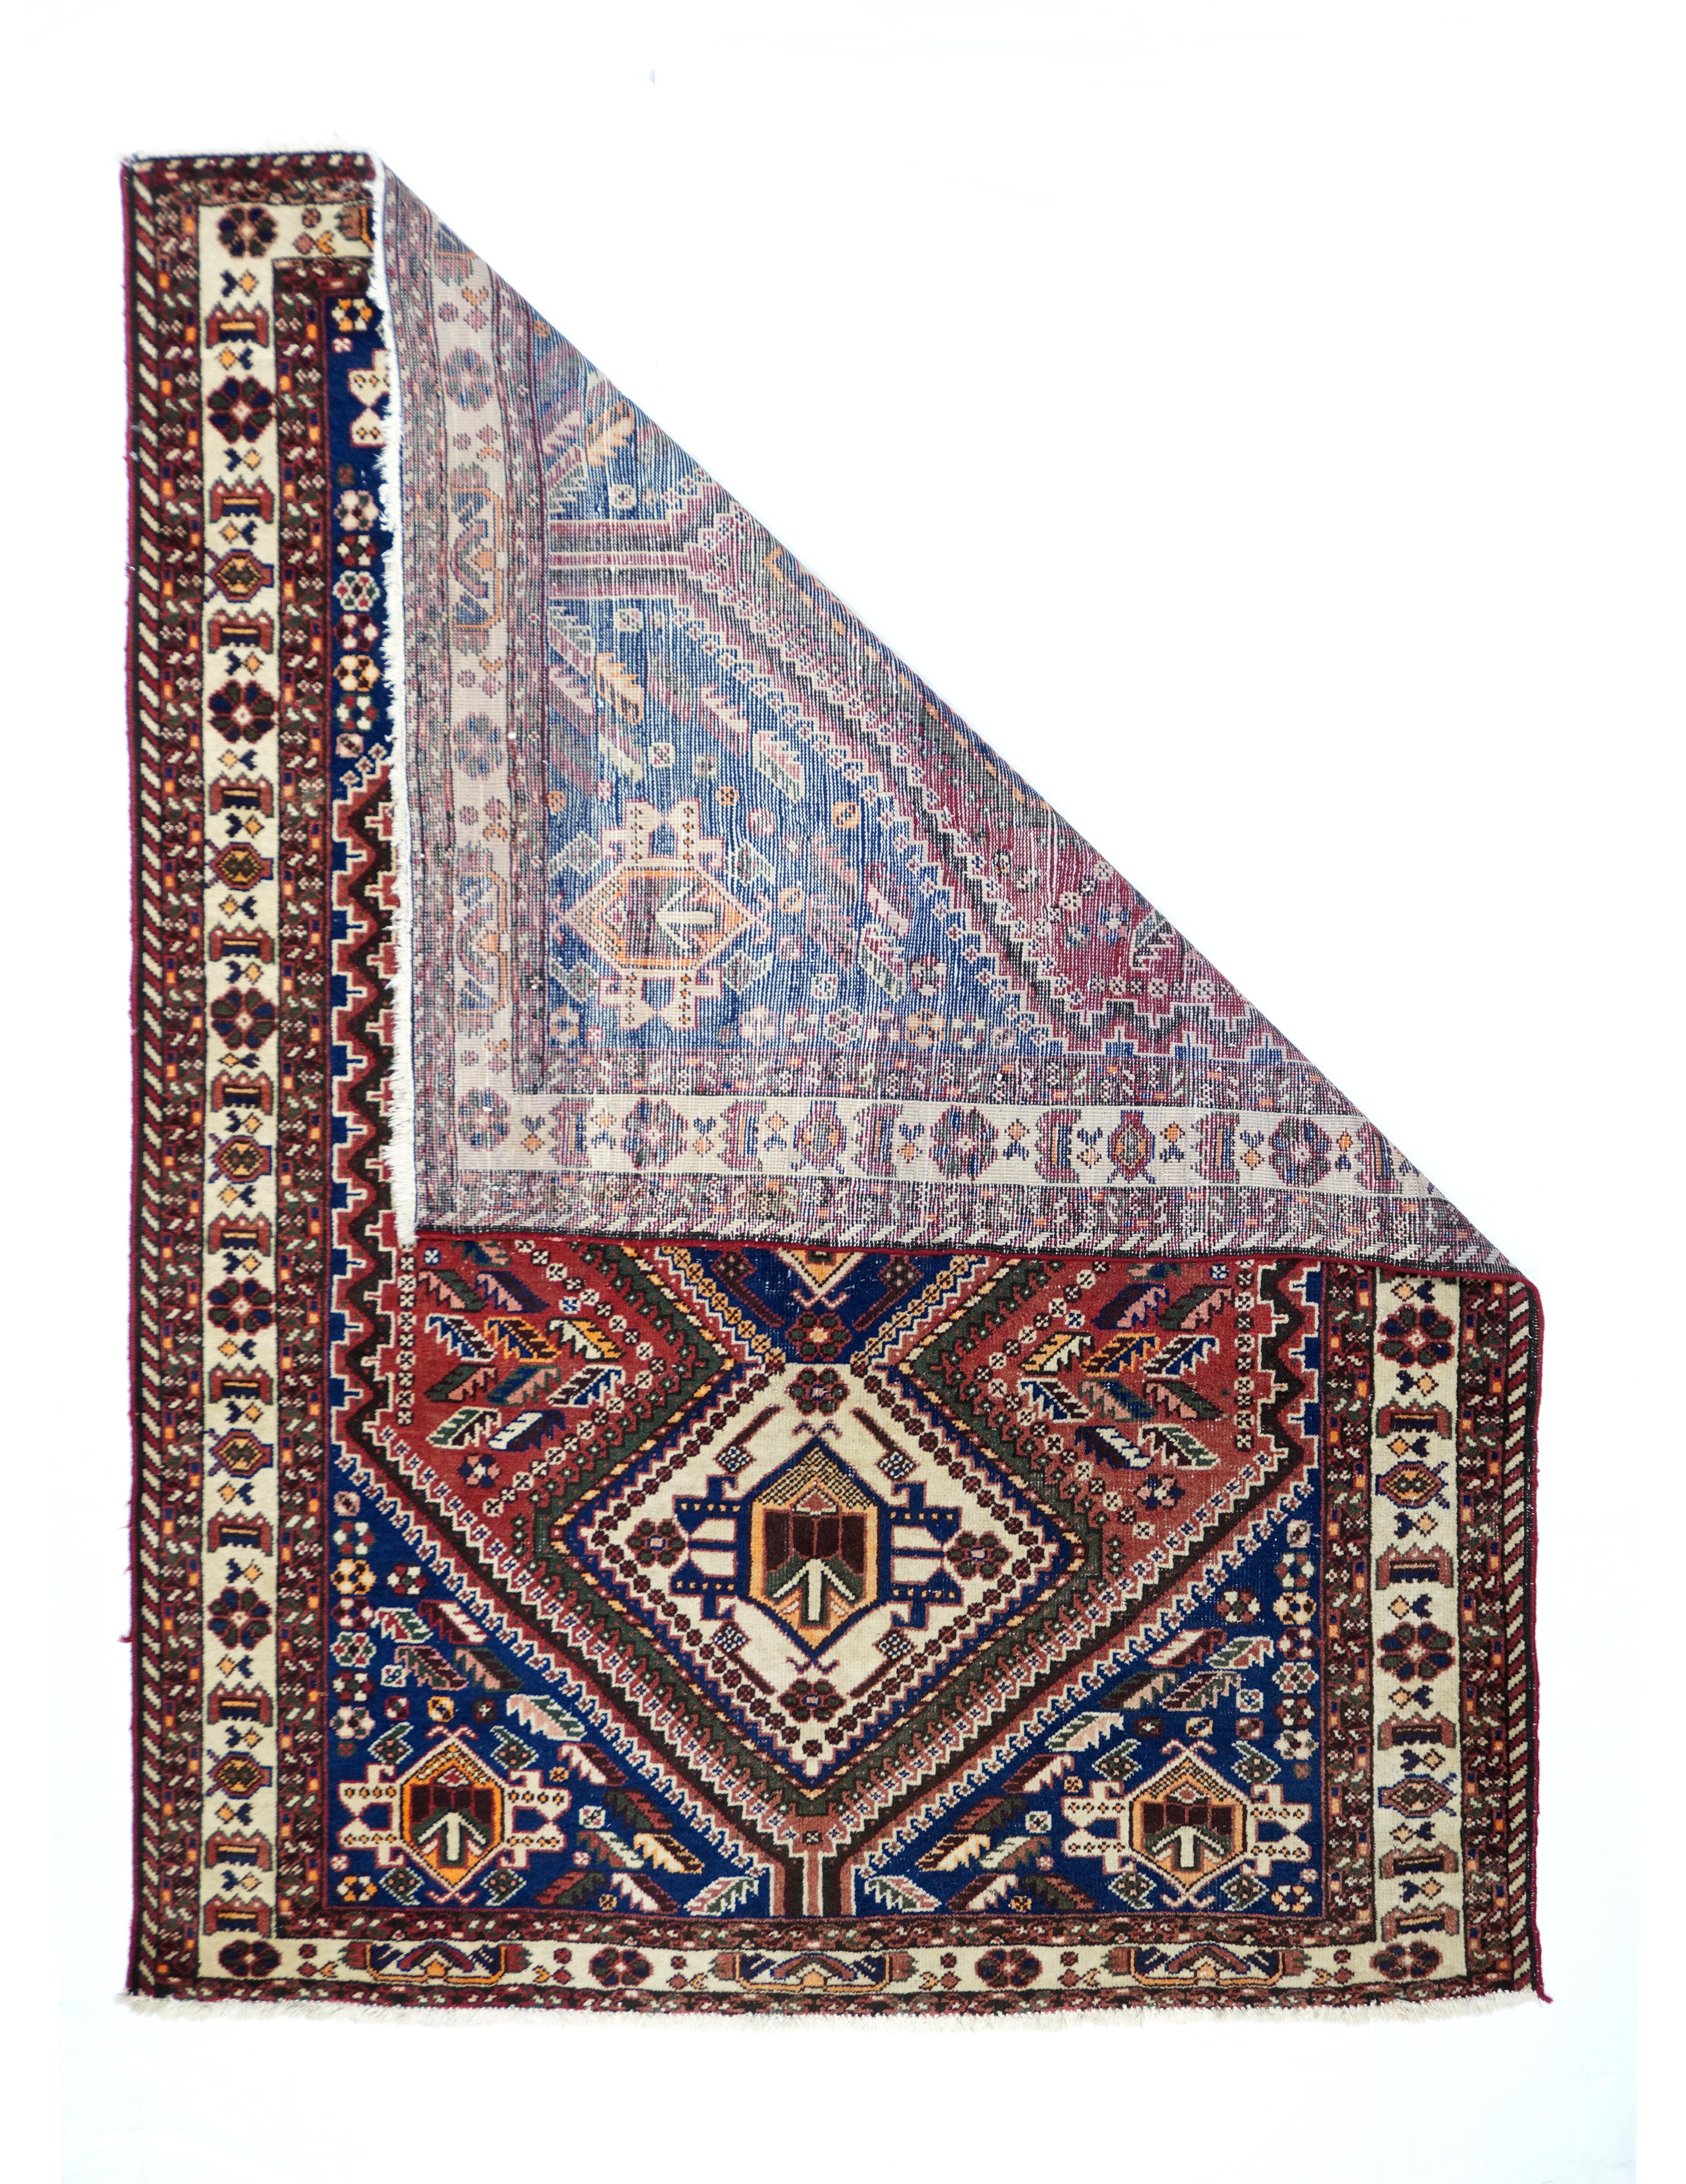 Vintage Qashqai Rug 5' x 6'11''. A pole medallion of three bnest4ed, stepped, conjoint octagons in old ivory and royal blue, with angular 